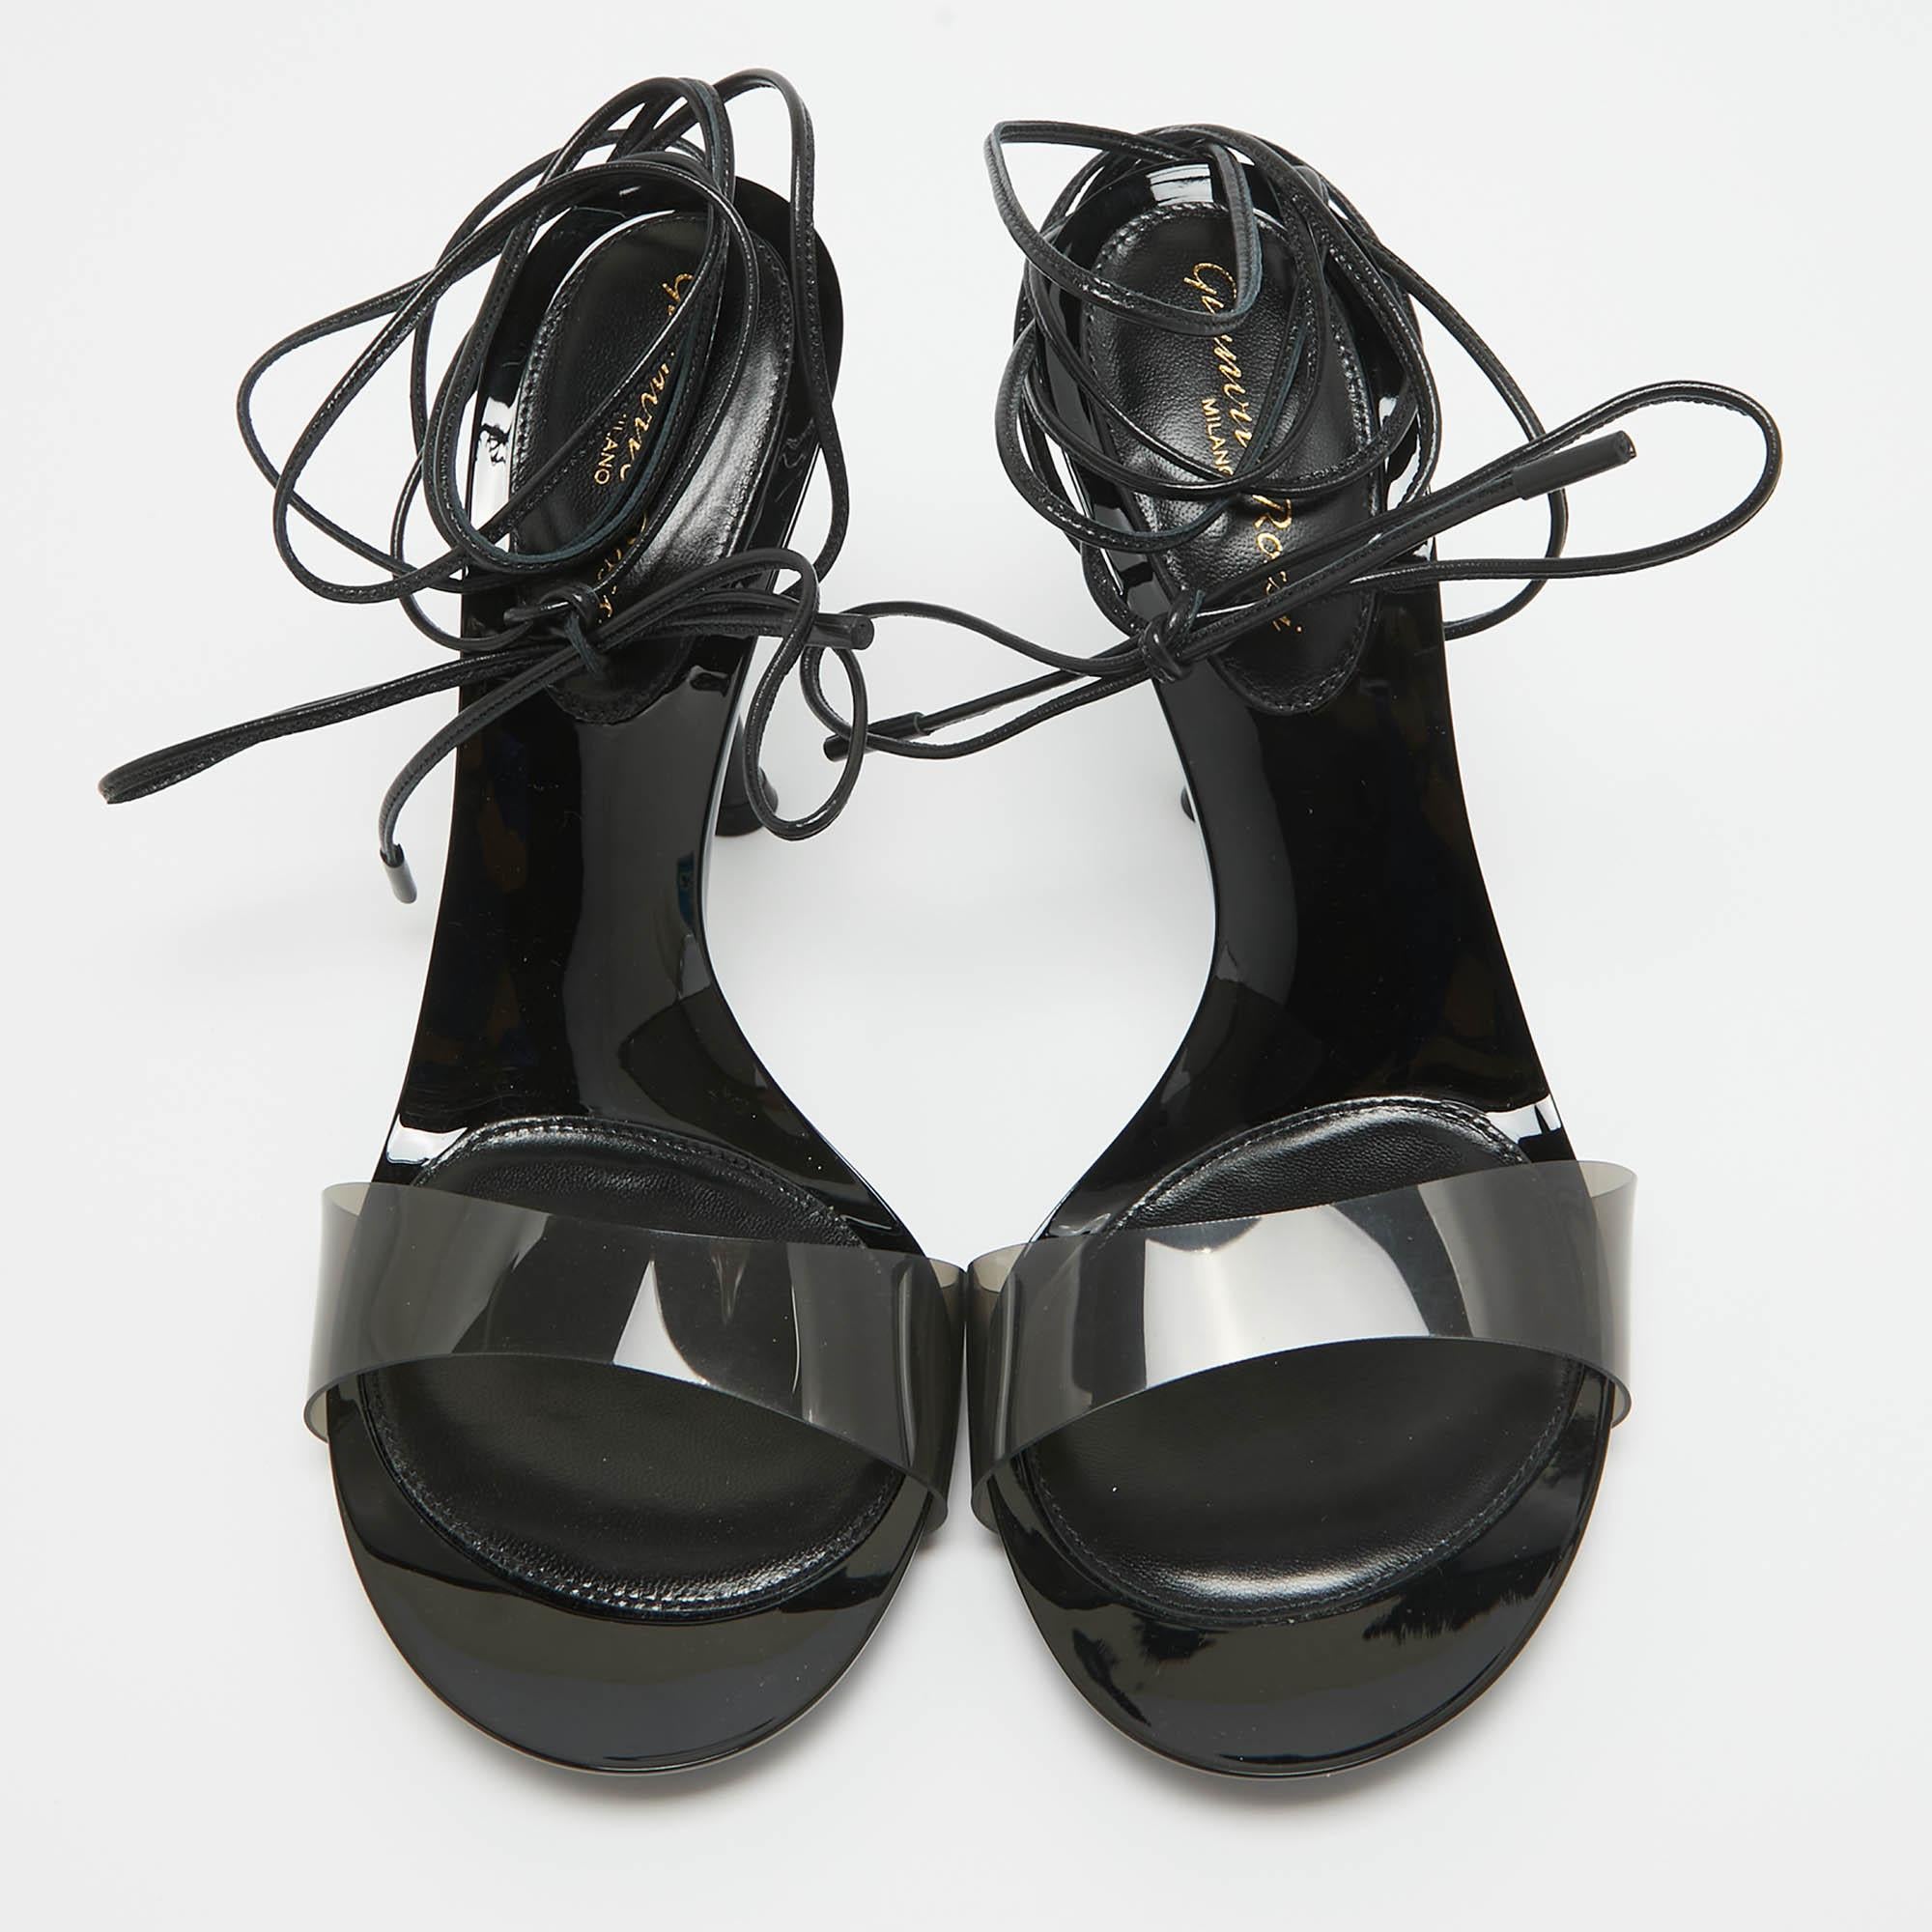 Gianvito Rossi Black PVC and Leather Spice Sandals Size 38 For Sale 2